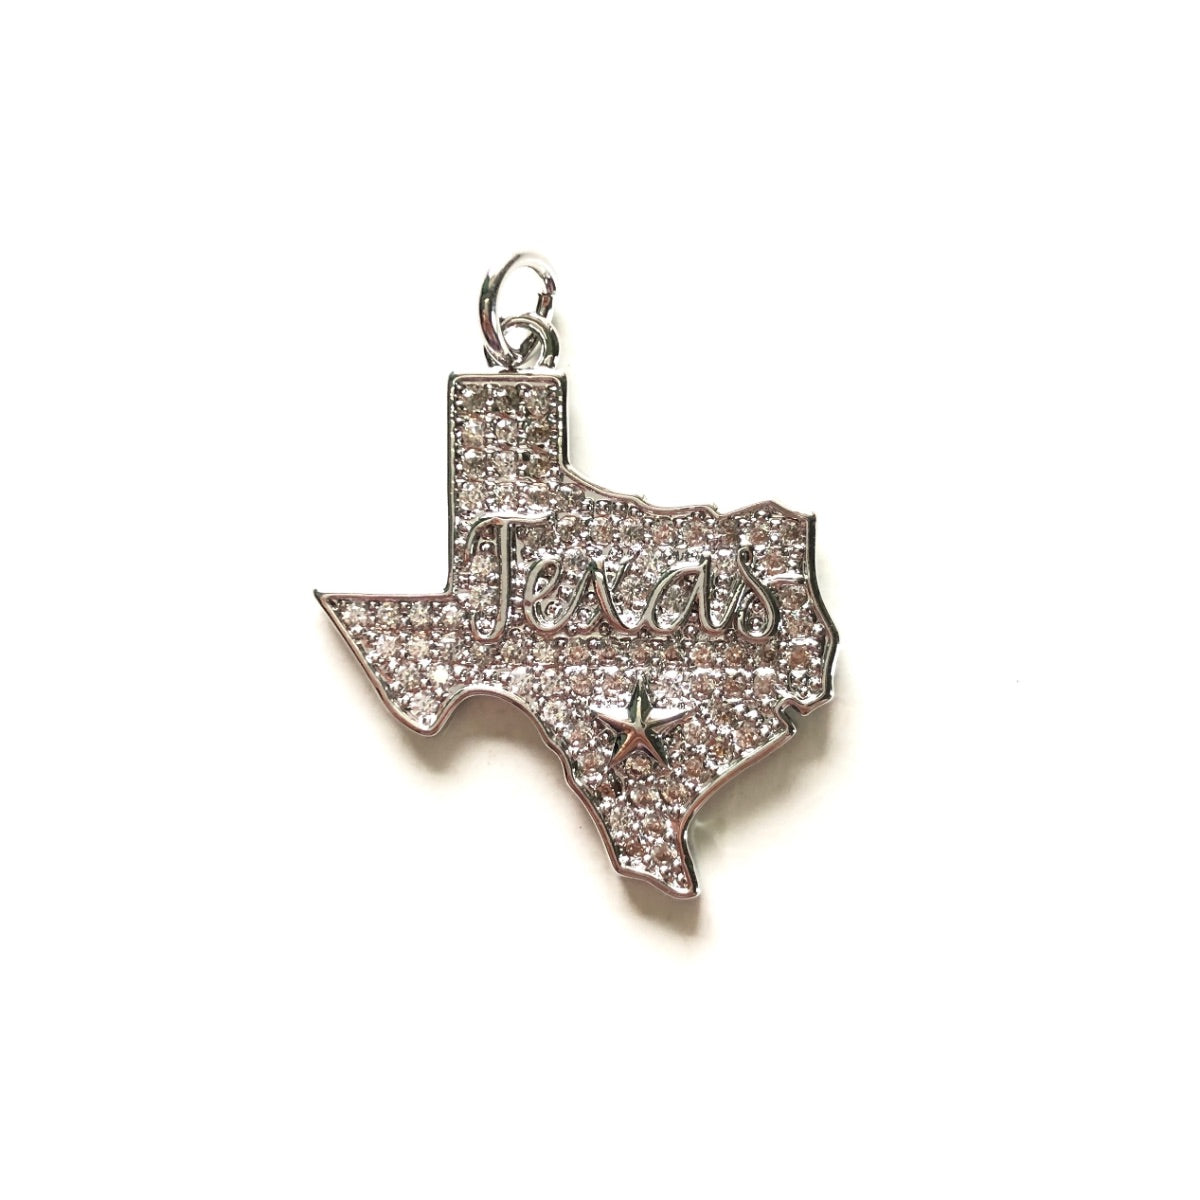 10pcs/lot 30*27mm CZ Lone Star State Texas Map Charm Pendants Silver CZ Paved Charms Maps On Sale Charms Beads Beyond